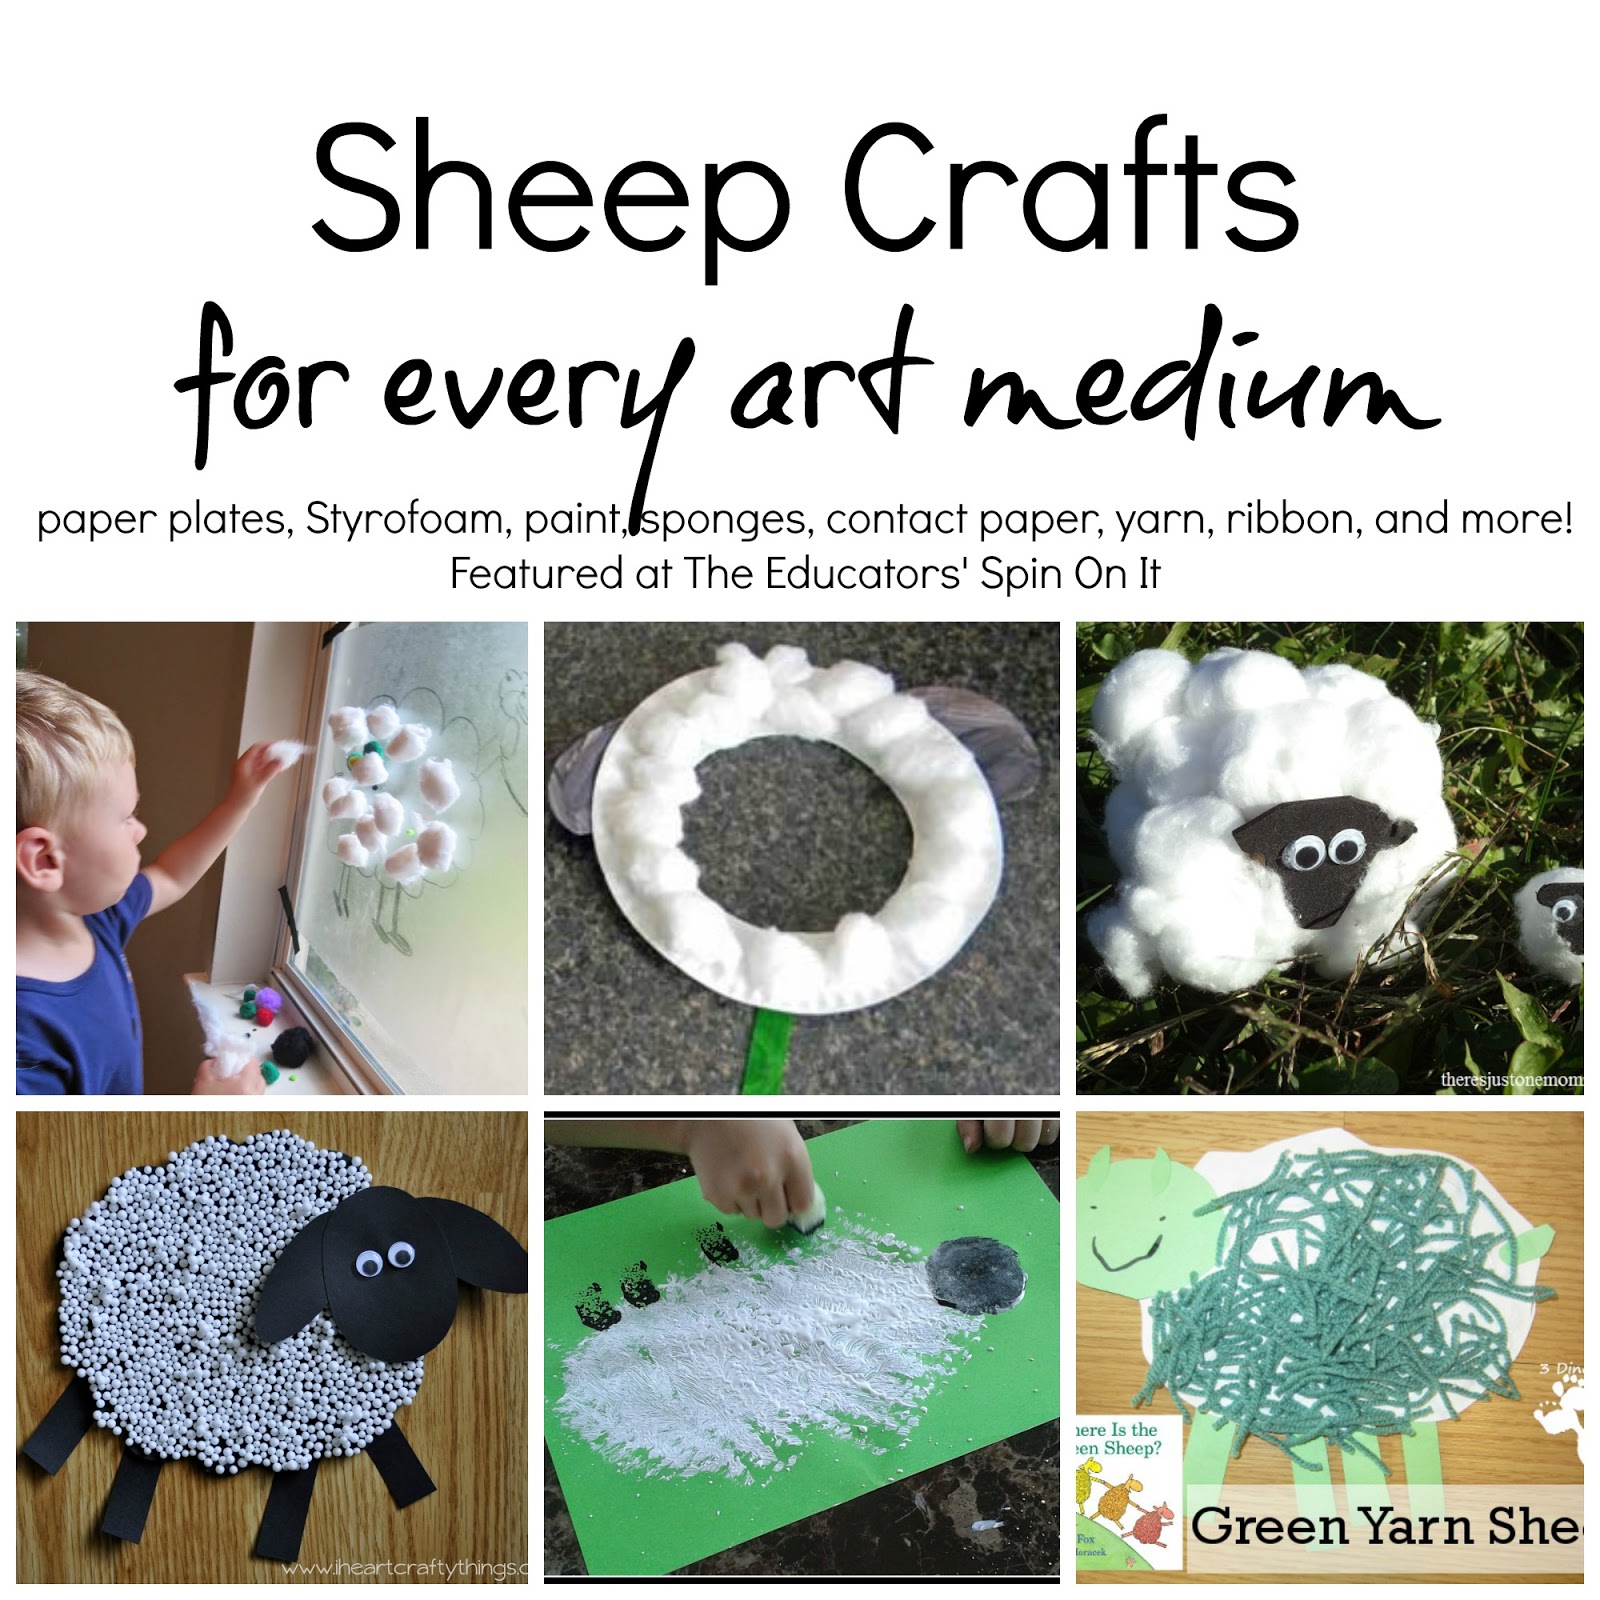 Sheep Crafts - The Educators' Spin On It